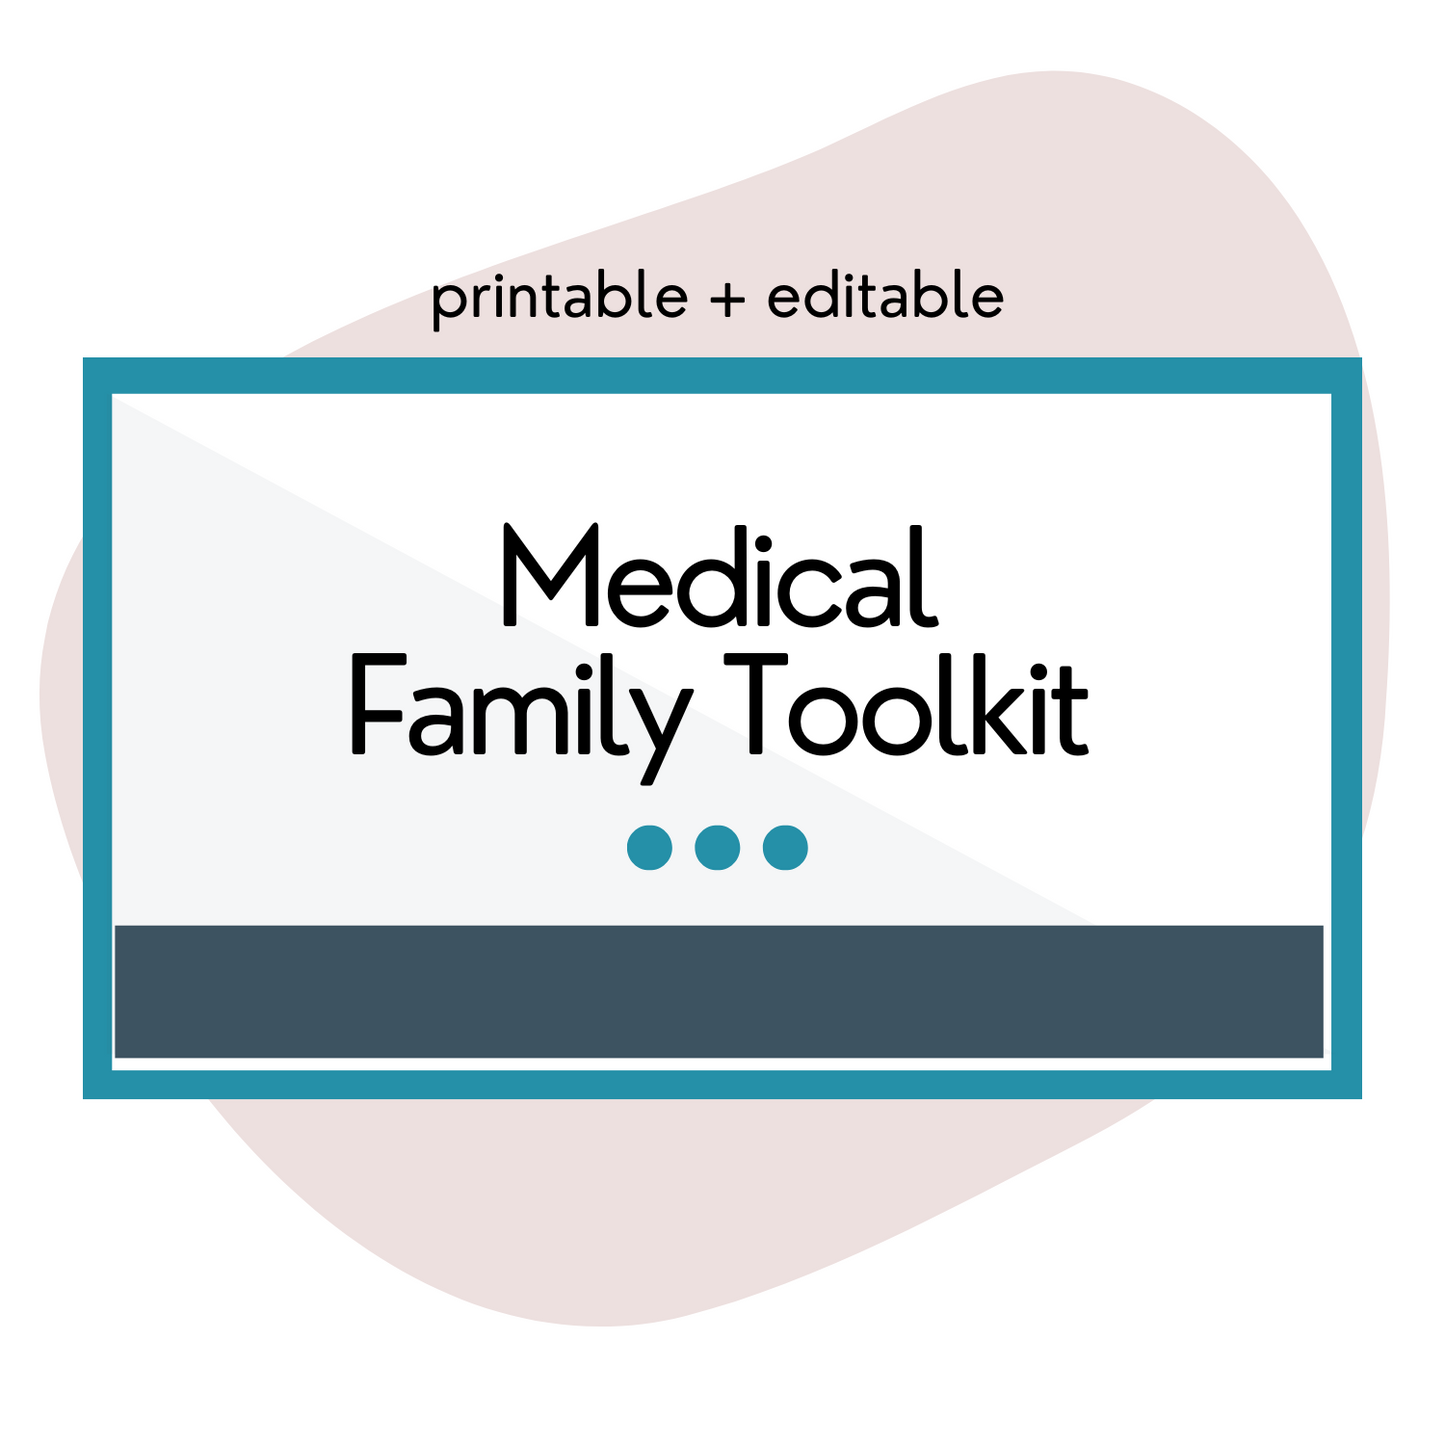 Medical Family Toolkit